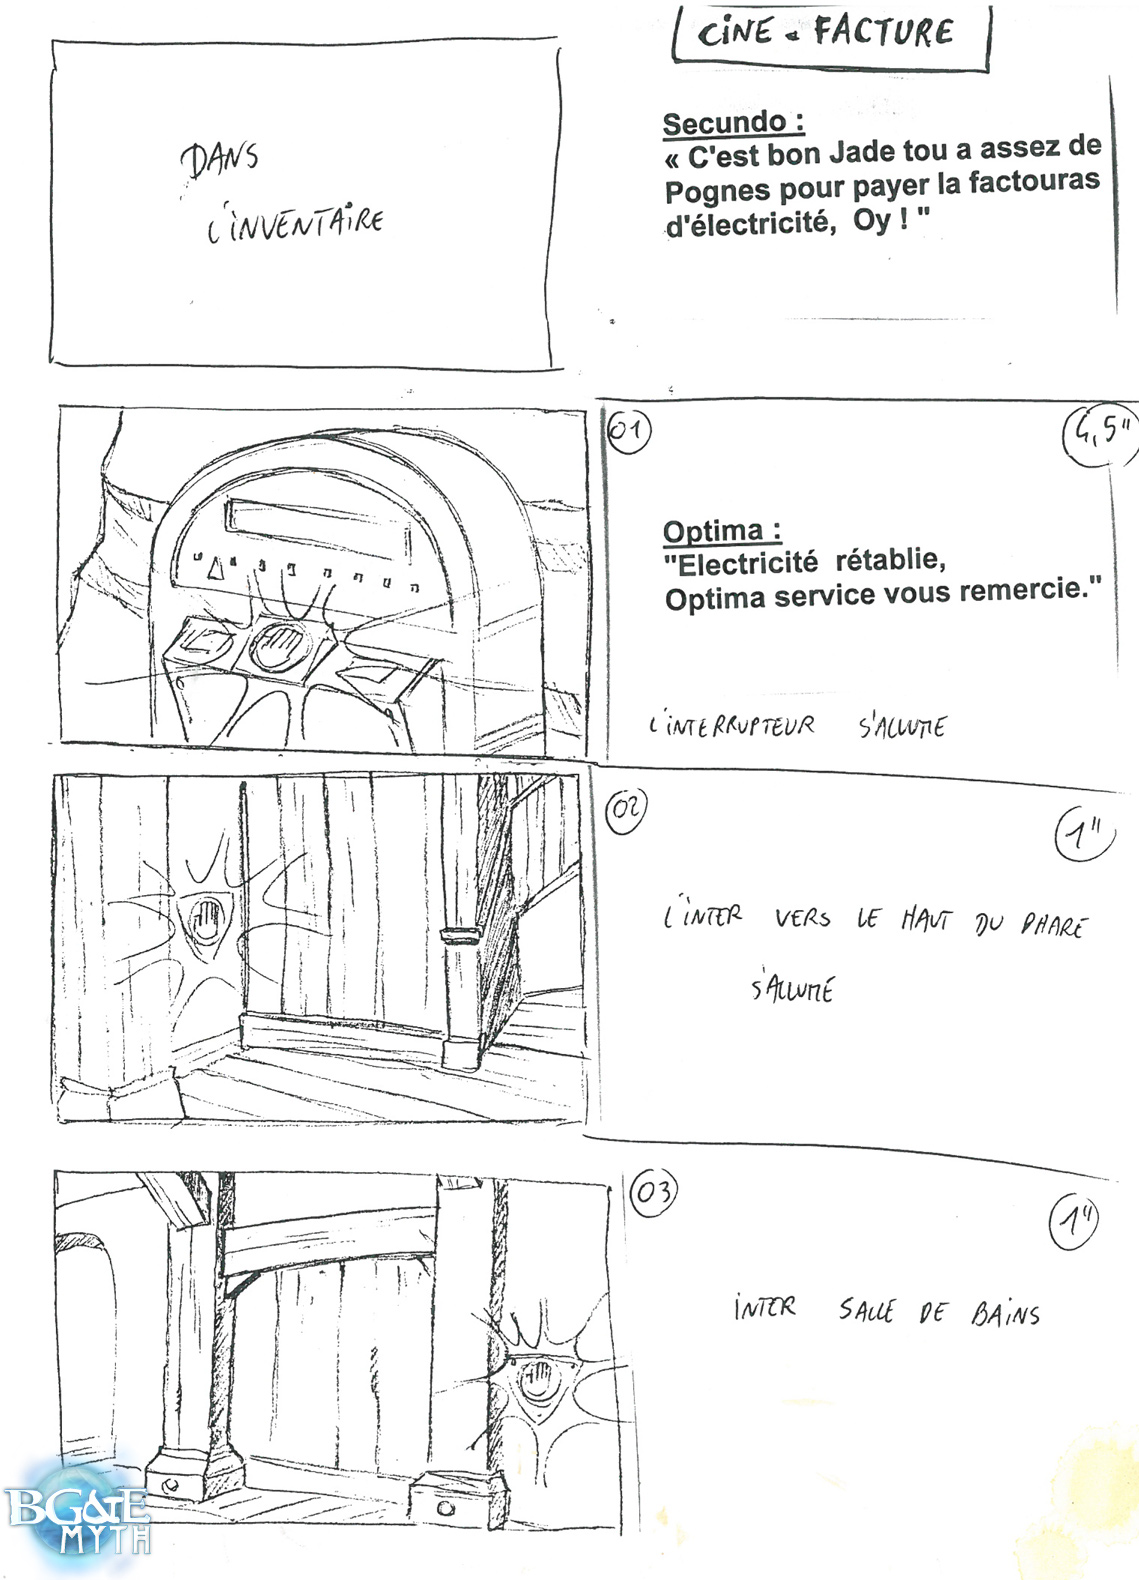 [Storyboard] Optima vous remercie ! - Page 1